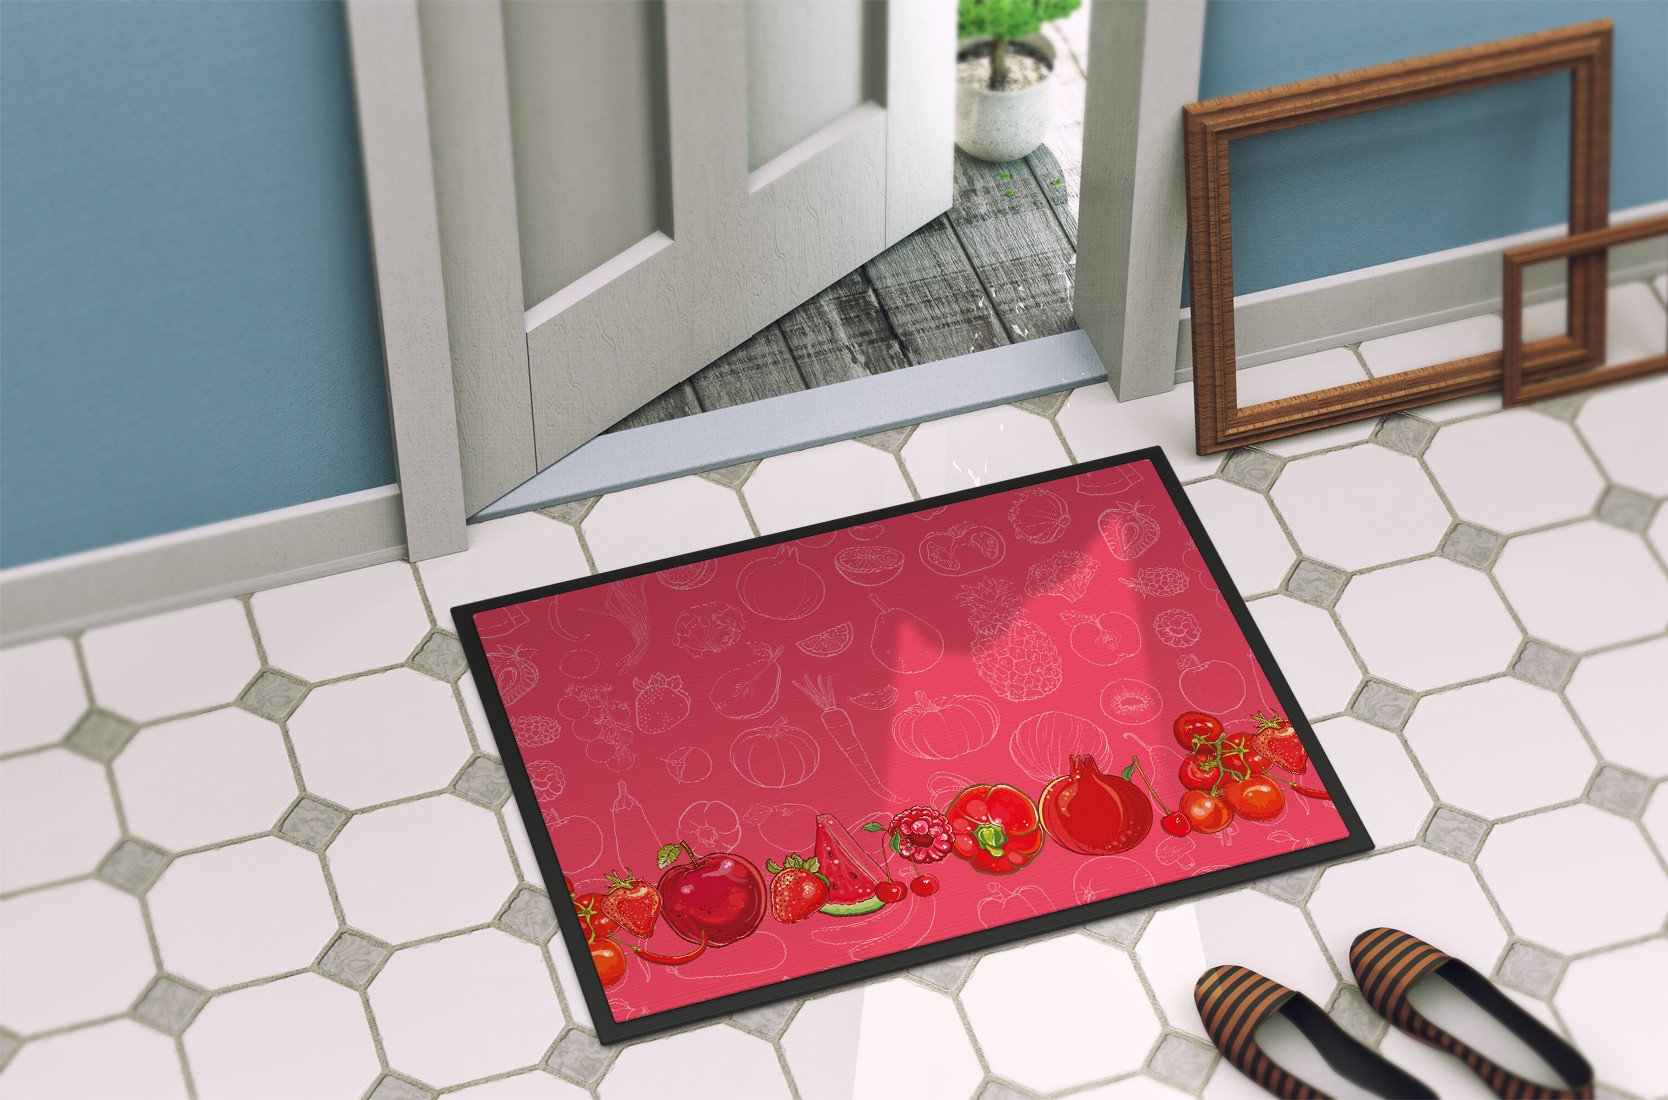 Fruits and Vegetables in Red Indoor or Outdoor Mat 24x36 BB5133JMAT by Caroline's Treasures